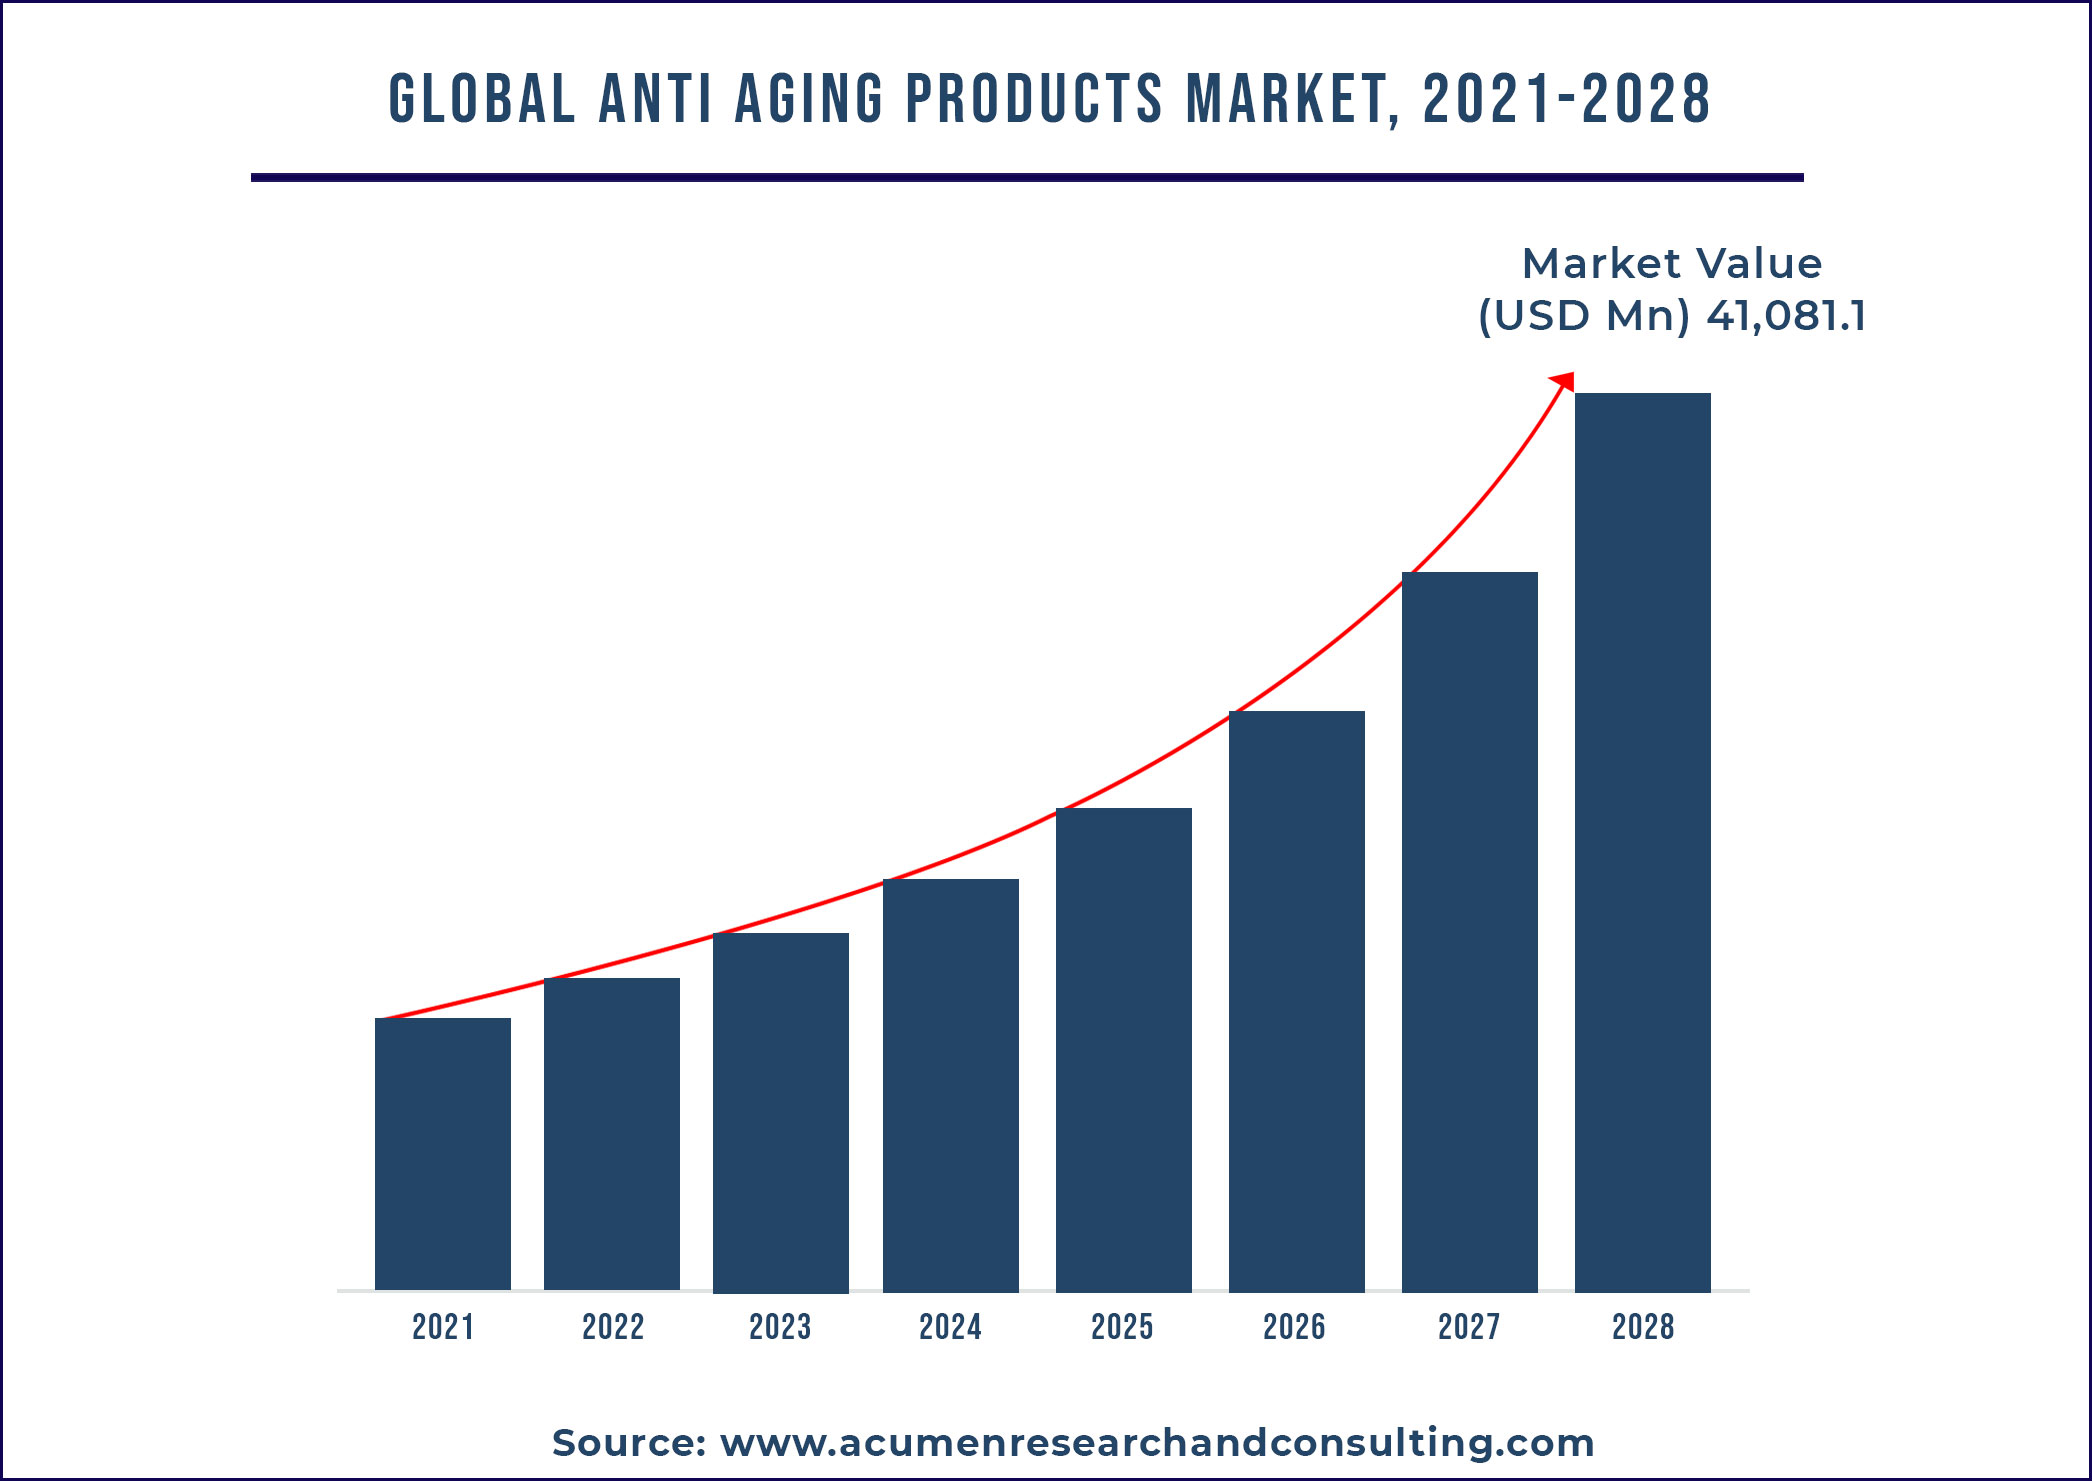 Anti Aging Products Market 2021-2028